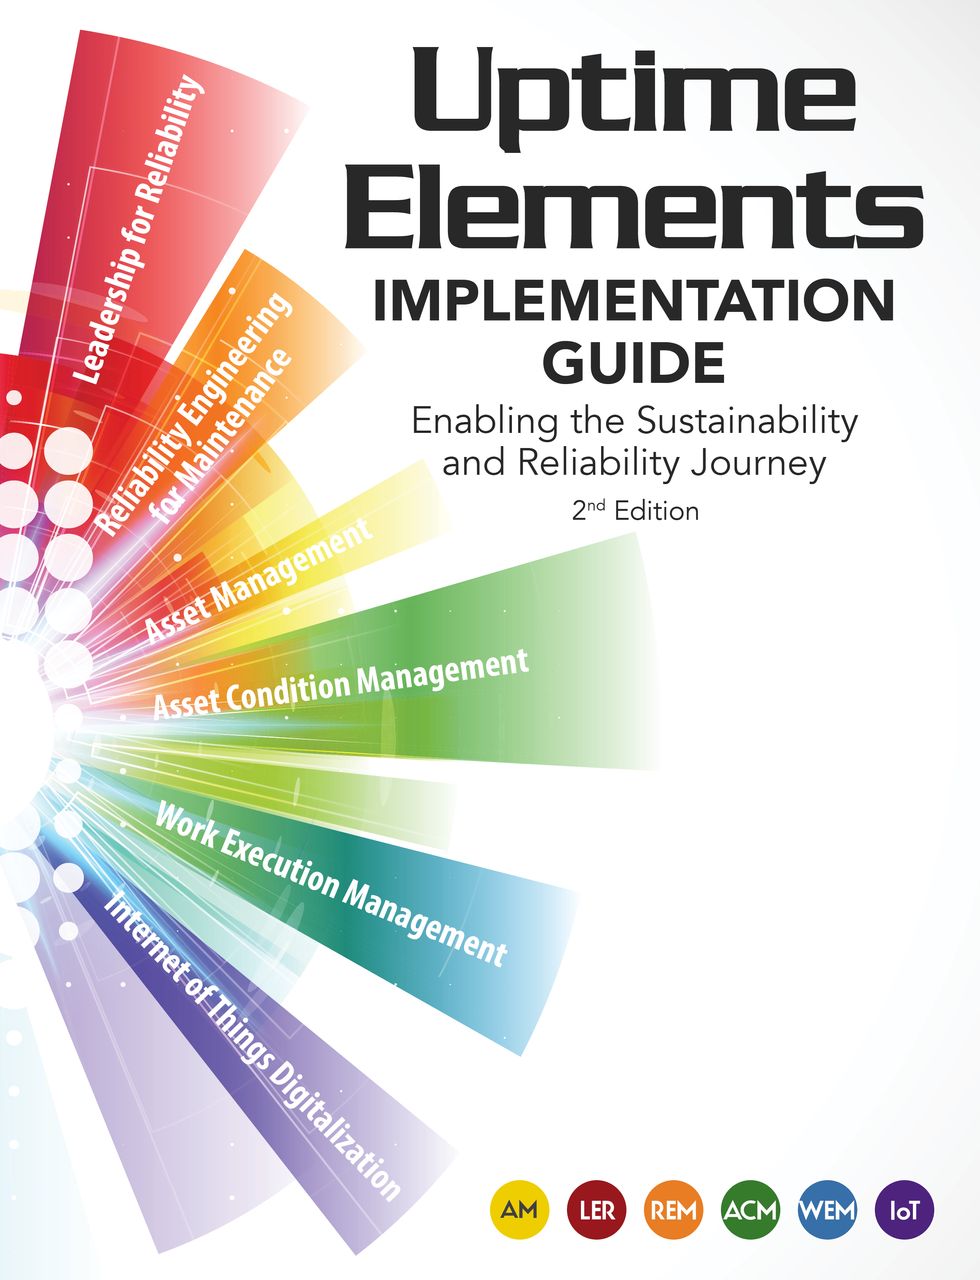 Uptime Elements Implementation Guide (2nd Edition)